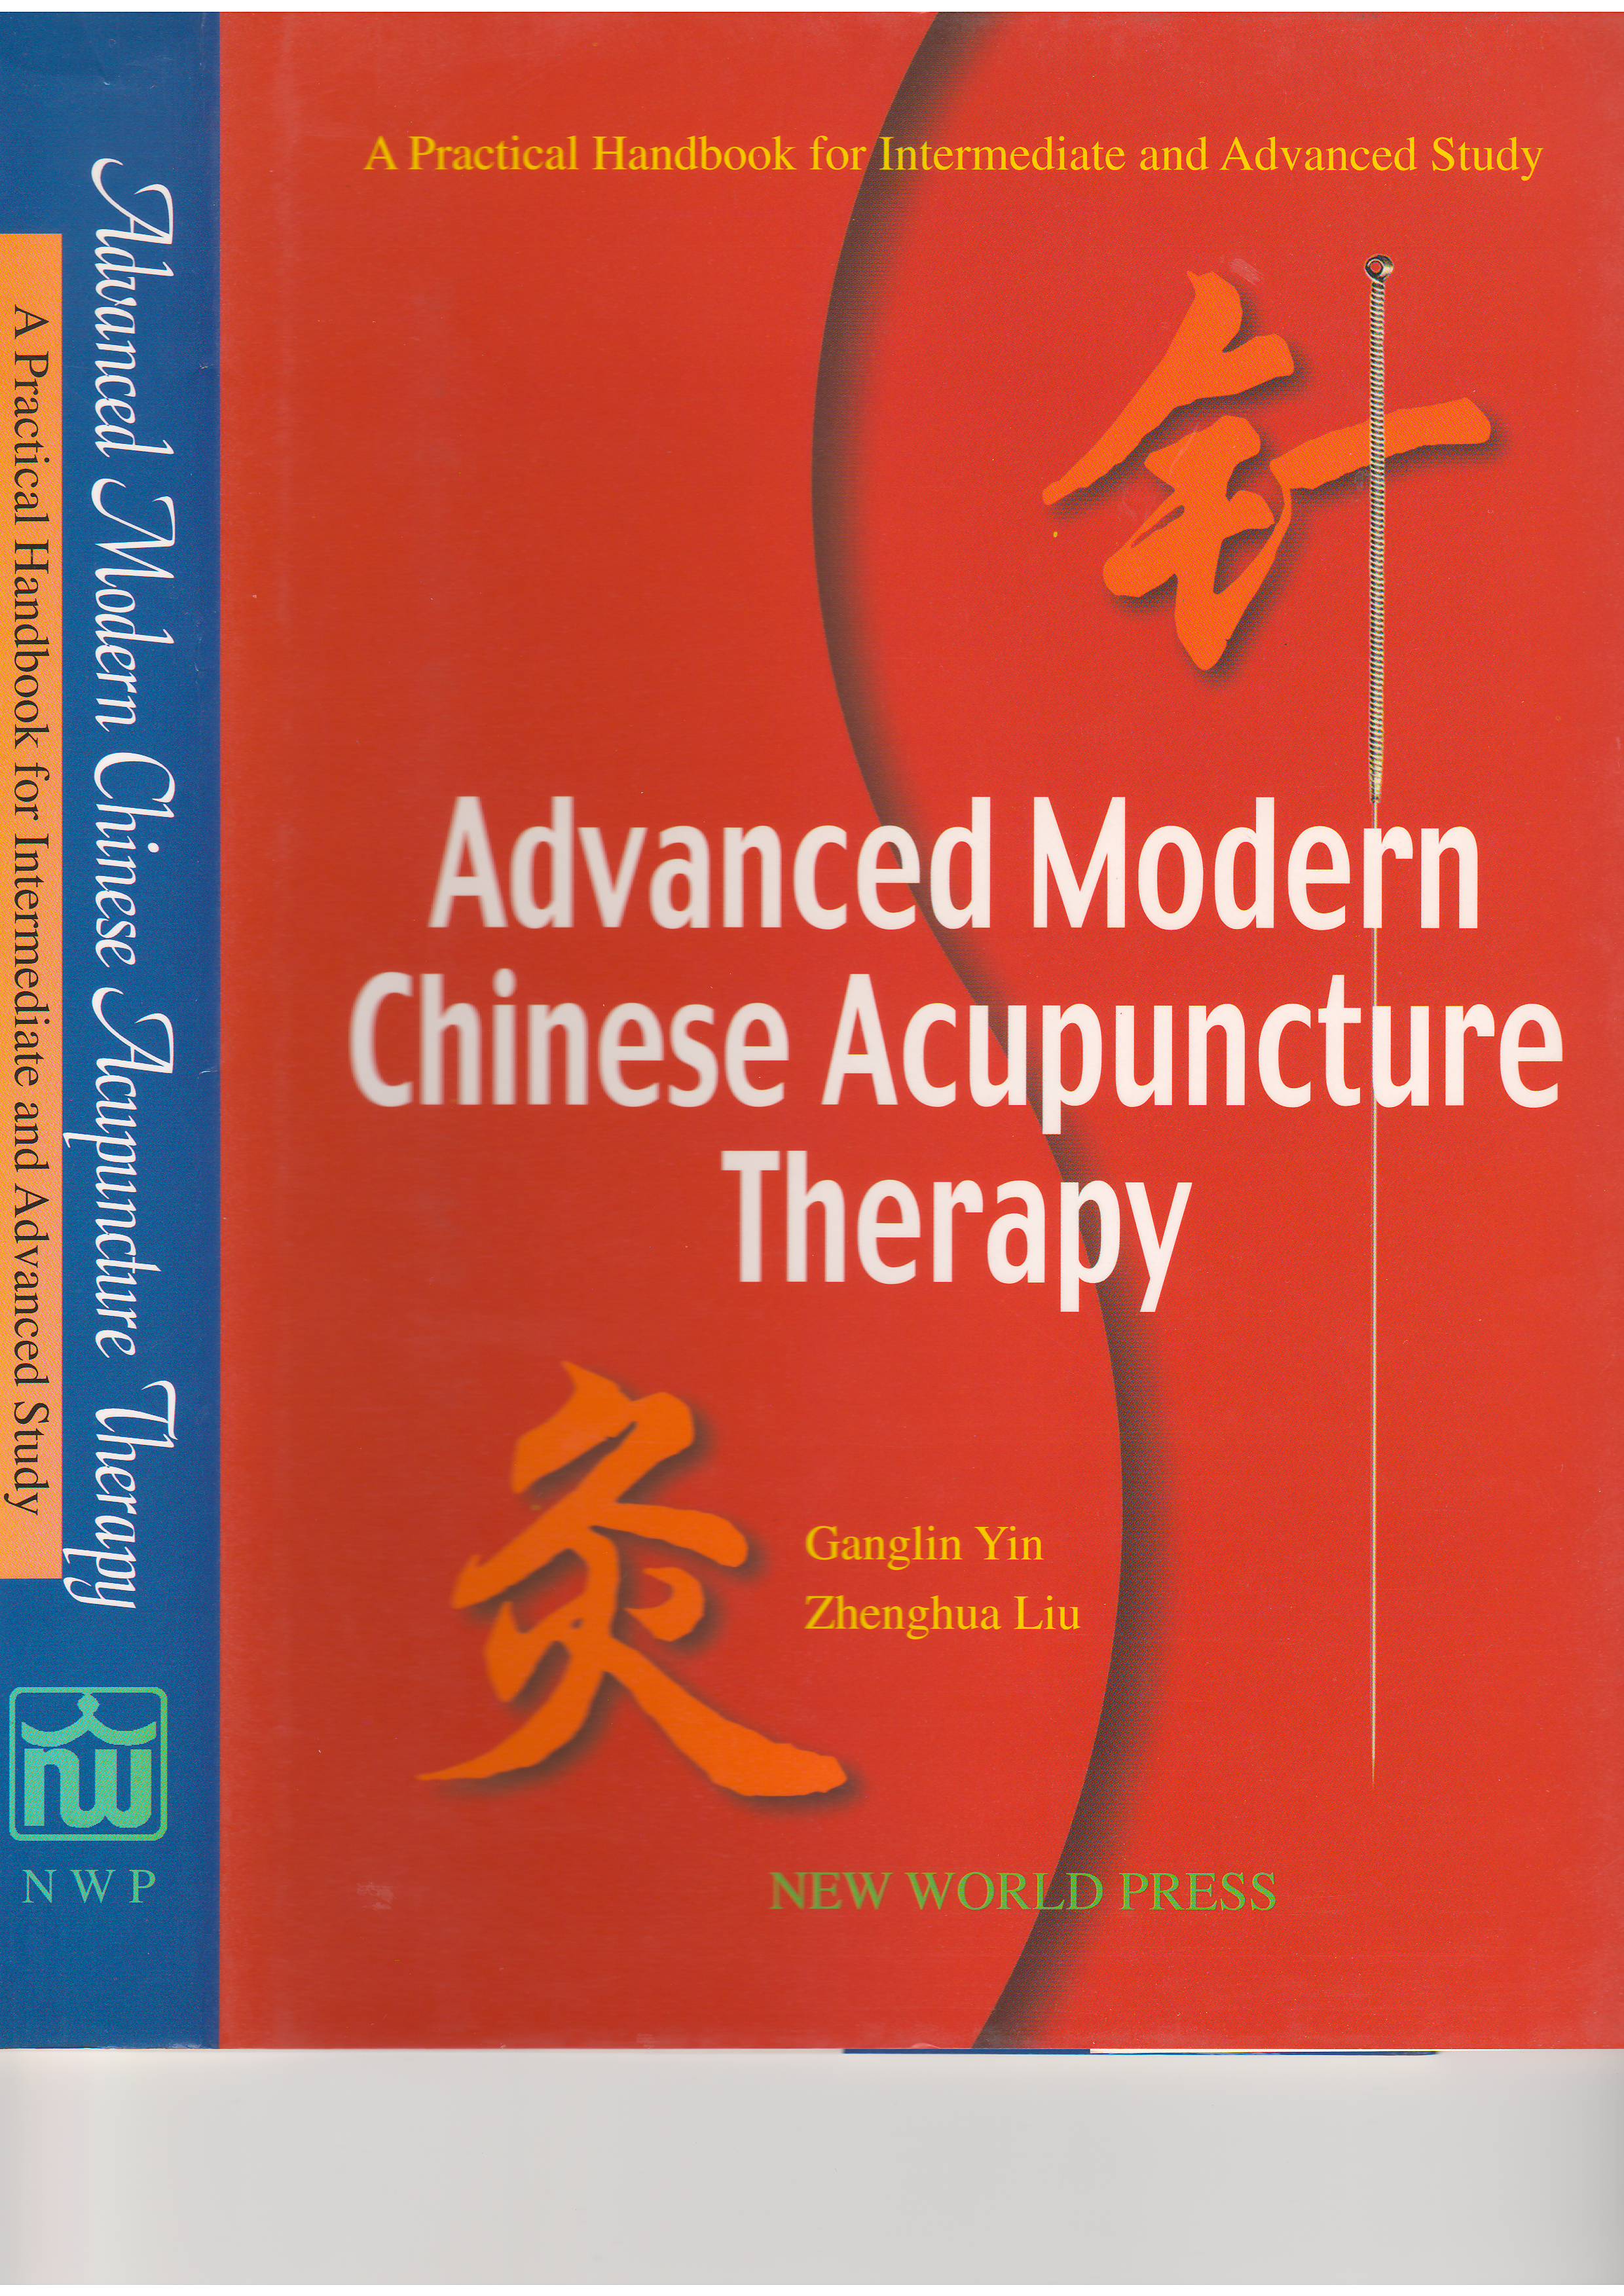 TCM and Acupuncture Books